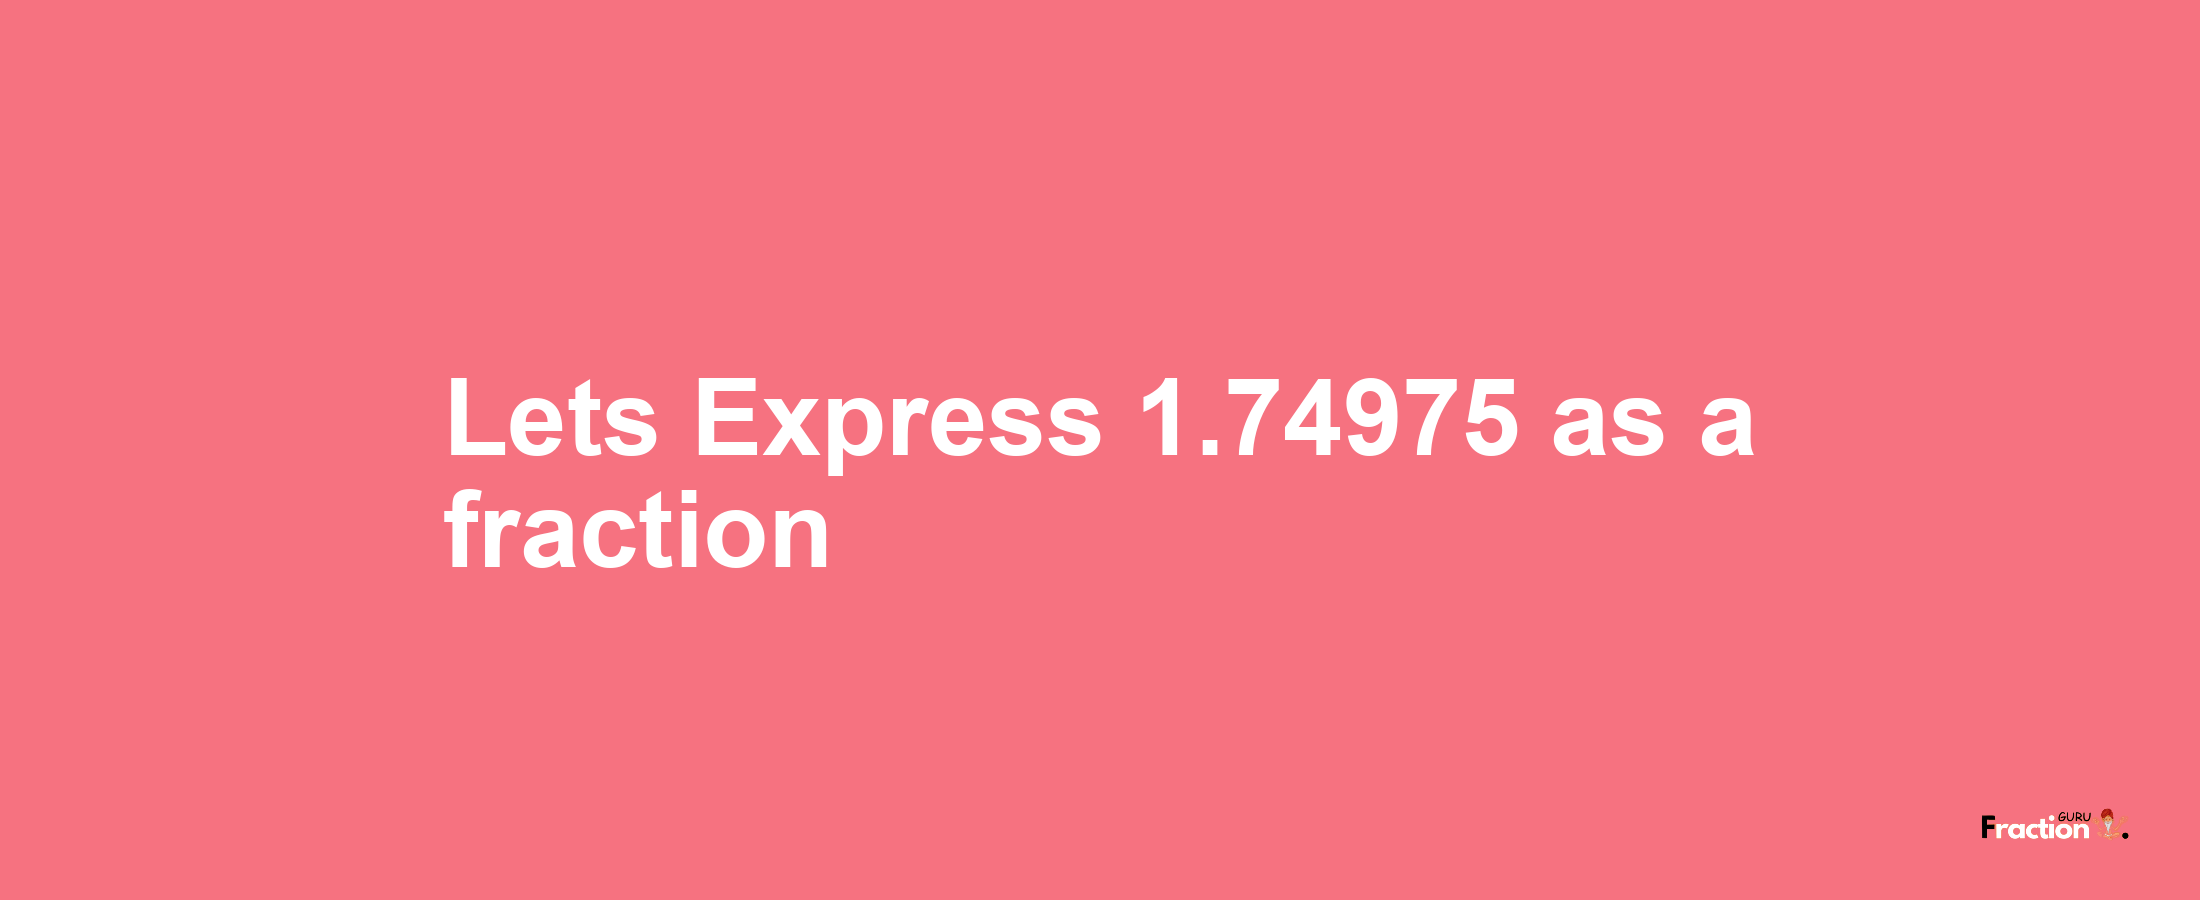 Lets Express 1.74975 as afraction